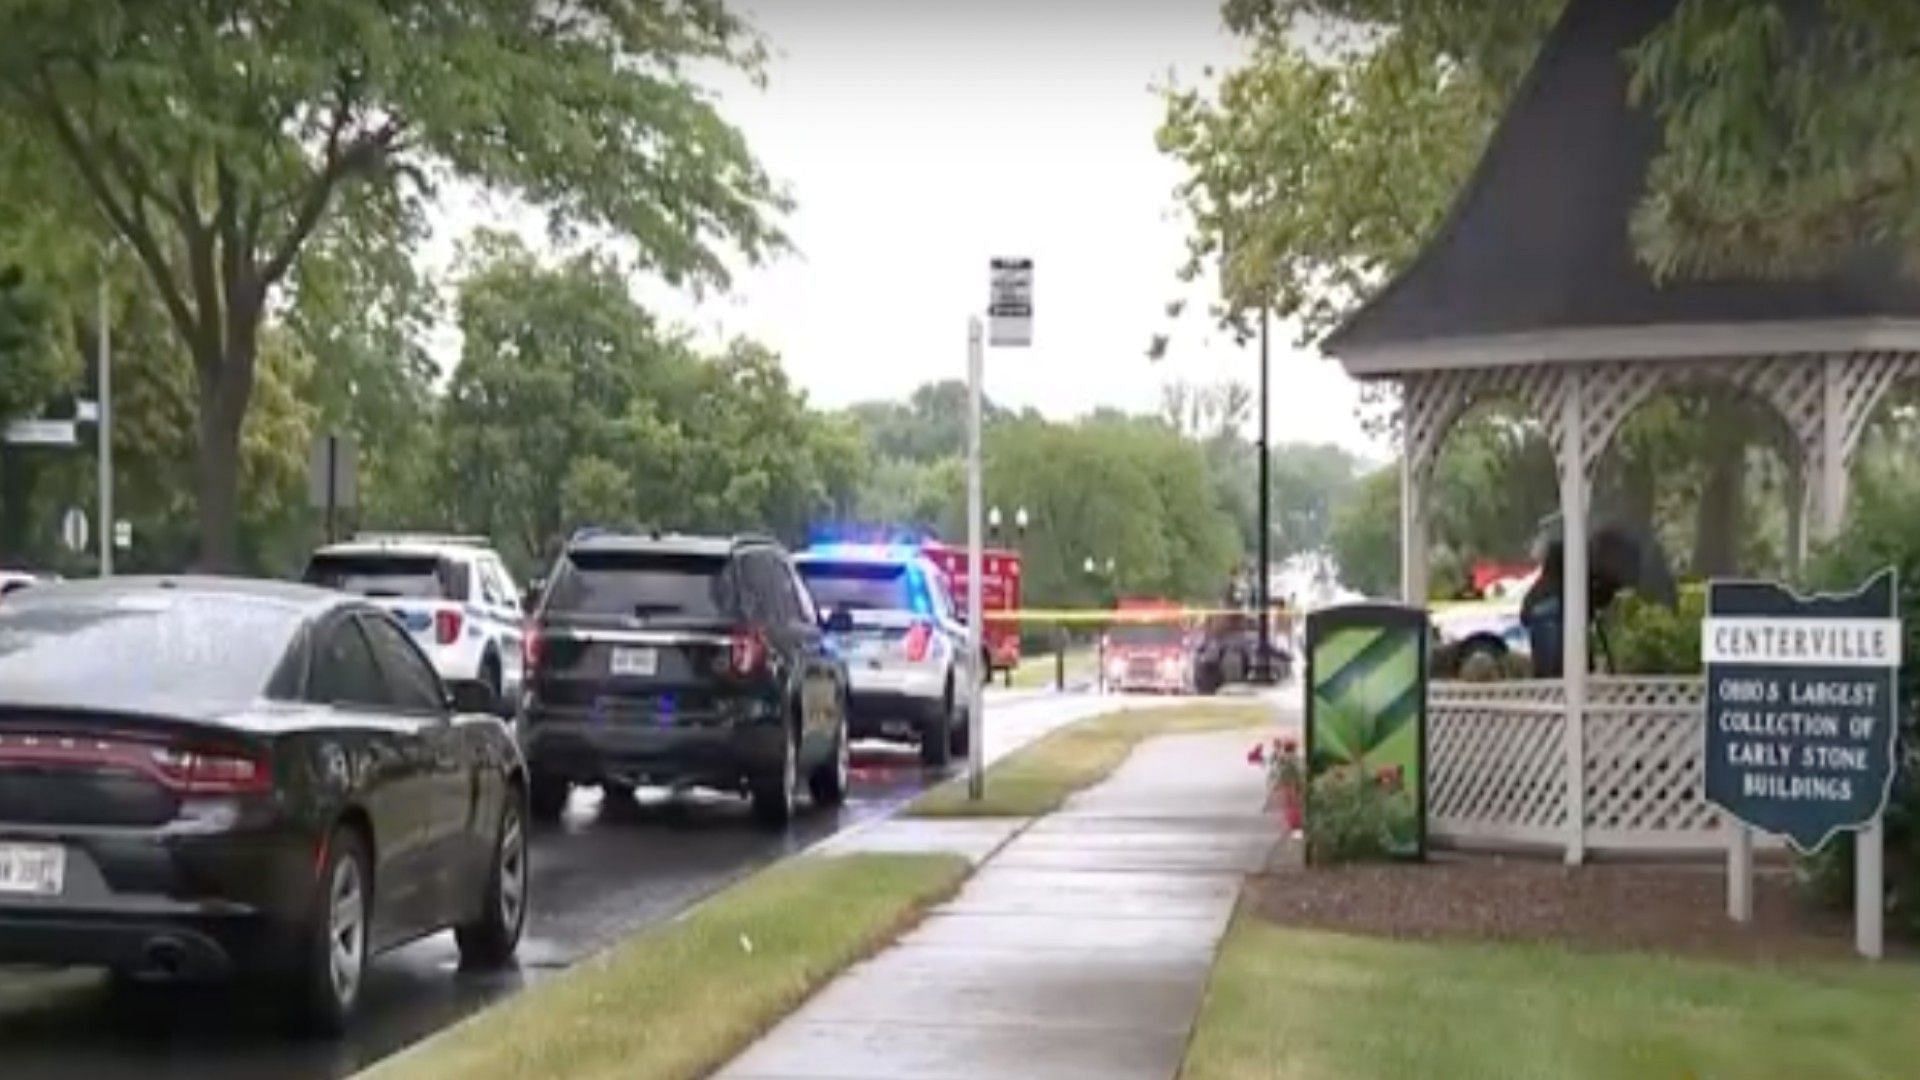 9-year-old Bryson Abraham killed after being struck by a truck in Centerville Ohio (Image via Screengrab/Youtube)